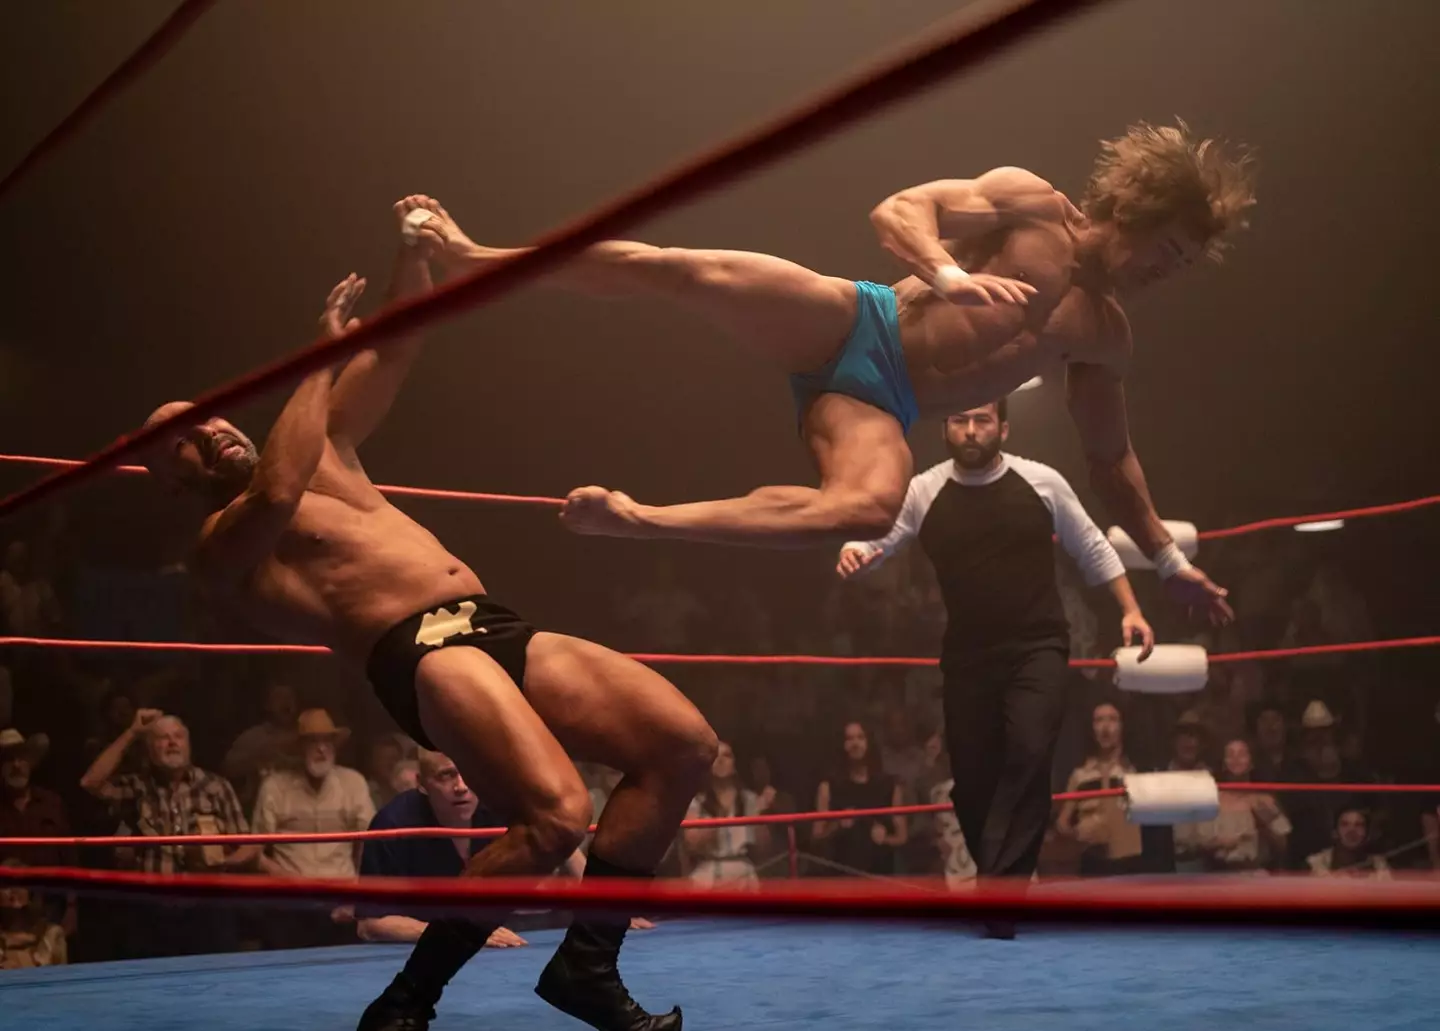 Sean Durkin said The Iron Claw is 'not a wrestling movie'.